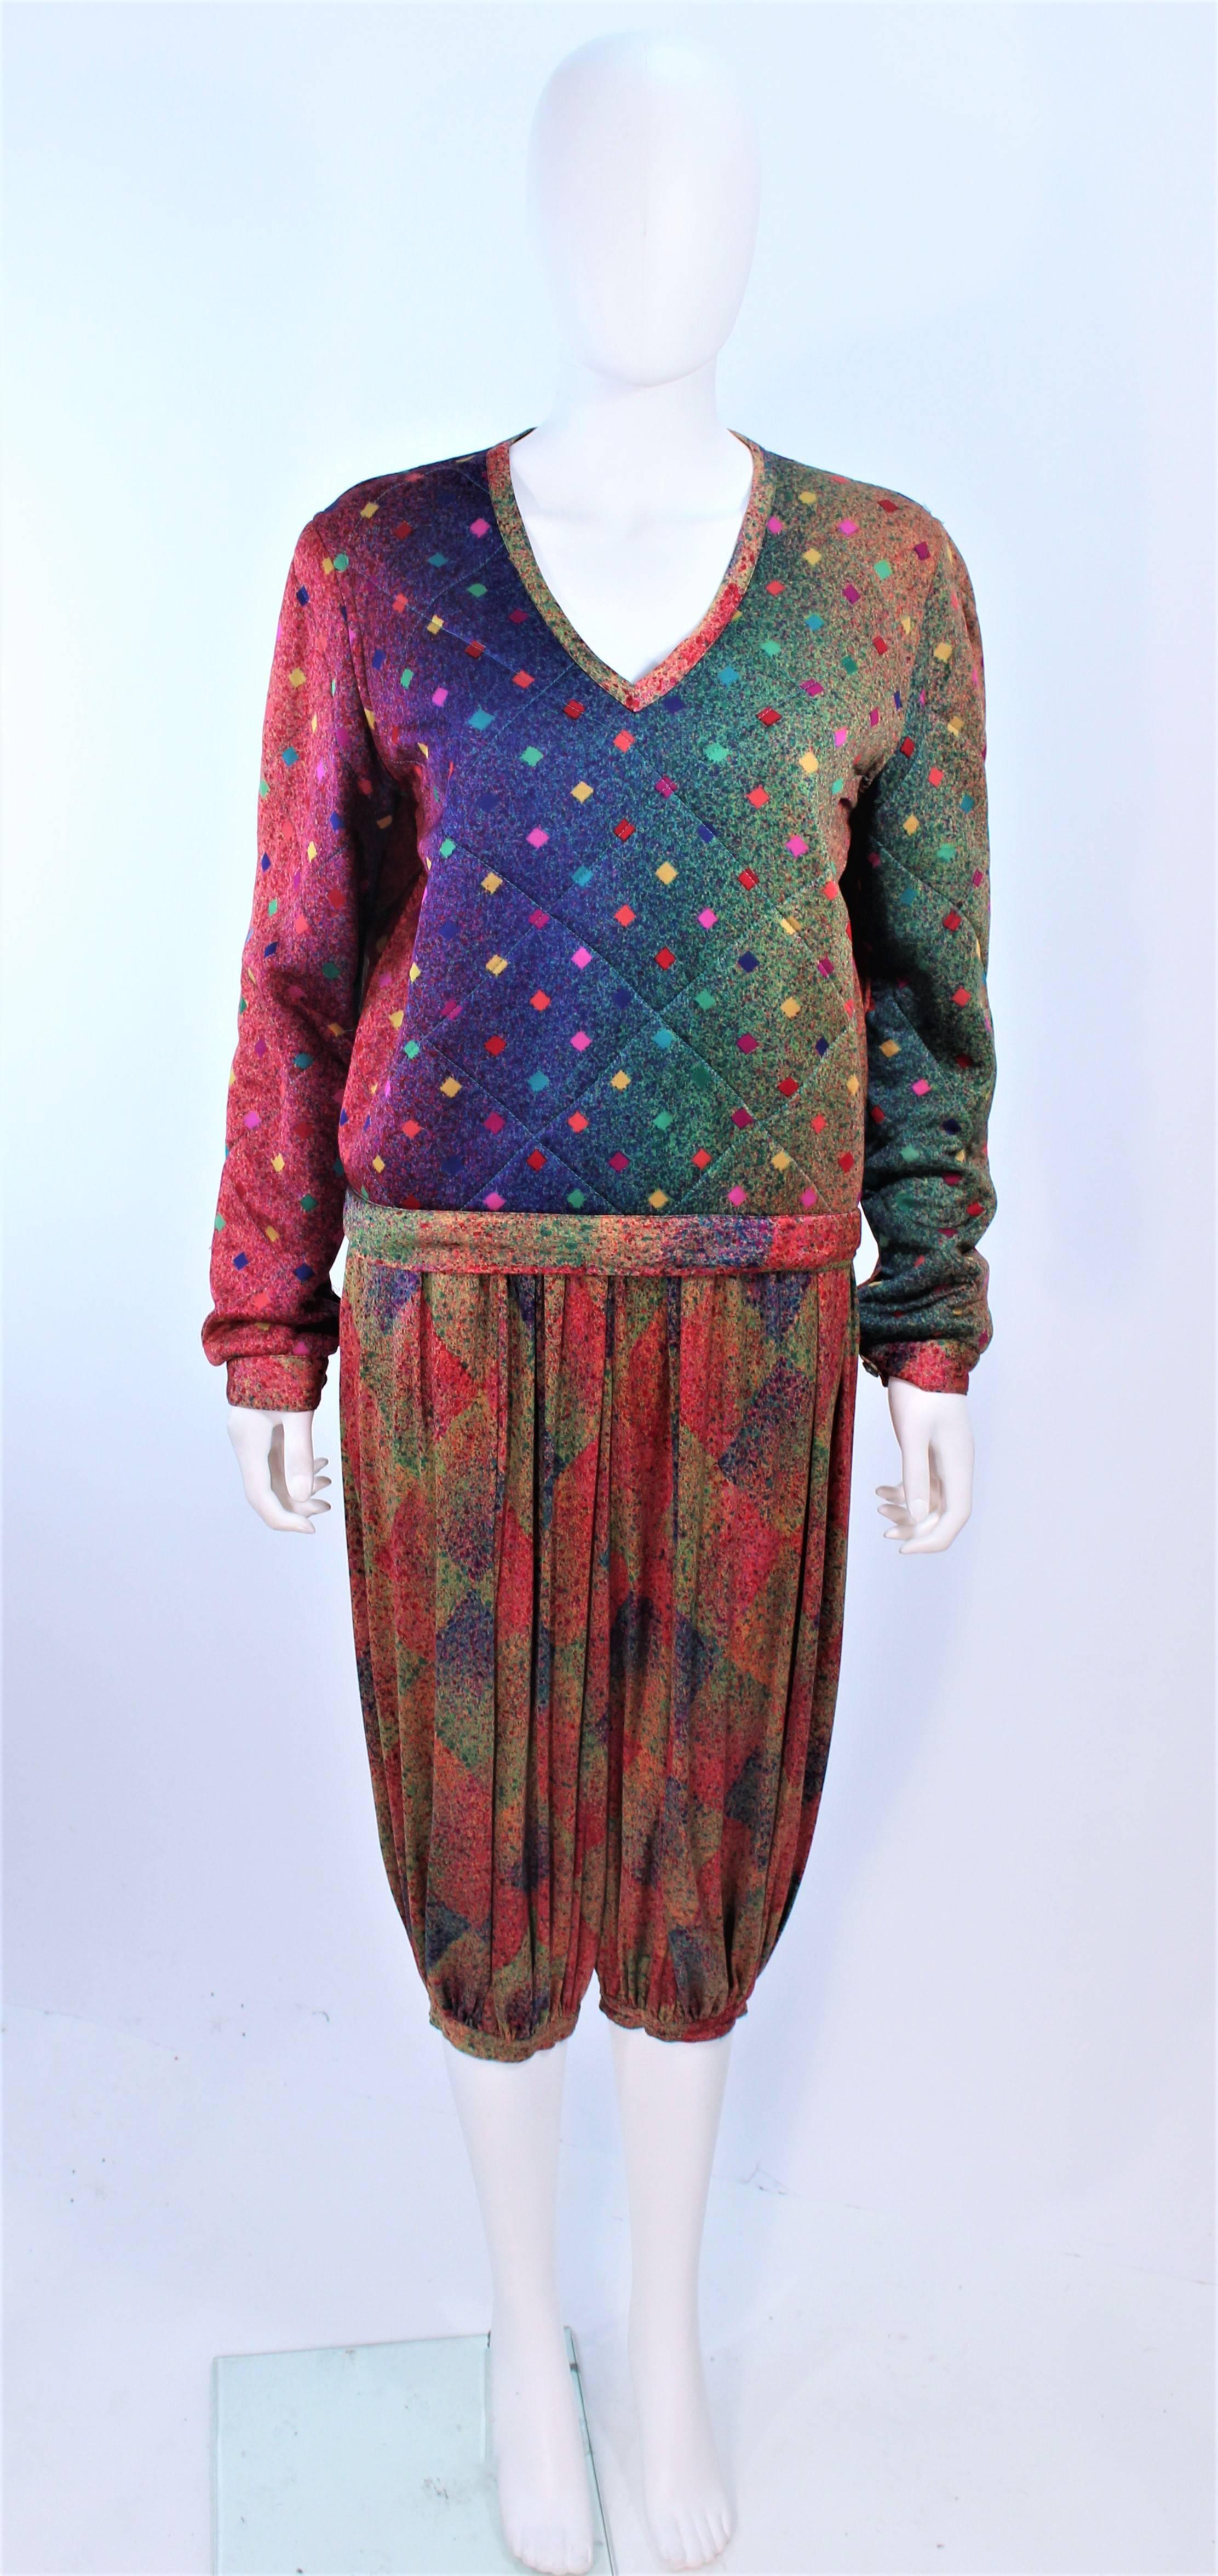 MISSONI Silk Rainbow Print Ensemble with Harem Pants Quilted Sweater Size 6 8 In Excellent Condition For Sale In Los Angeles, CA